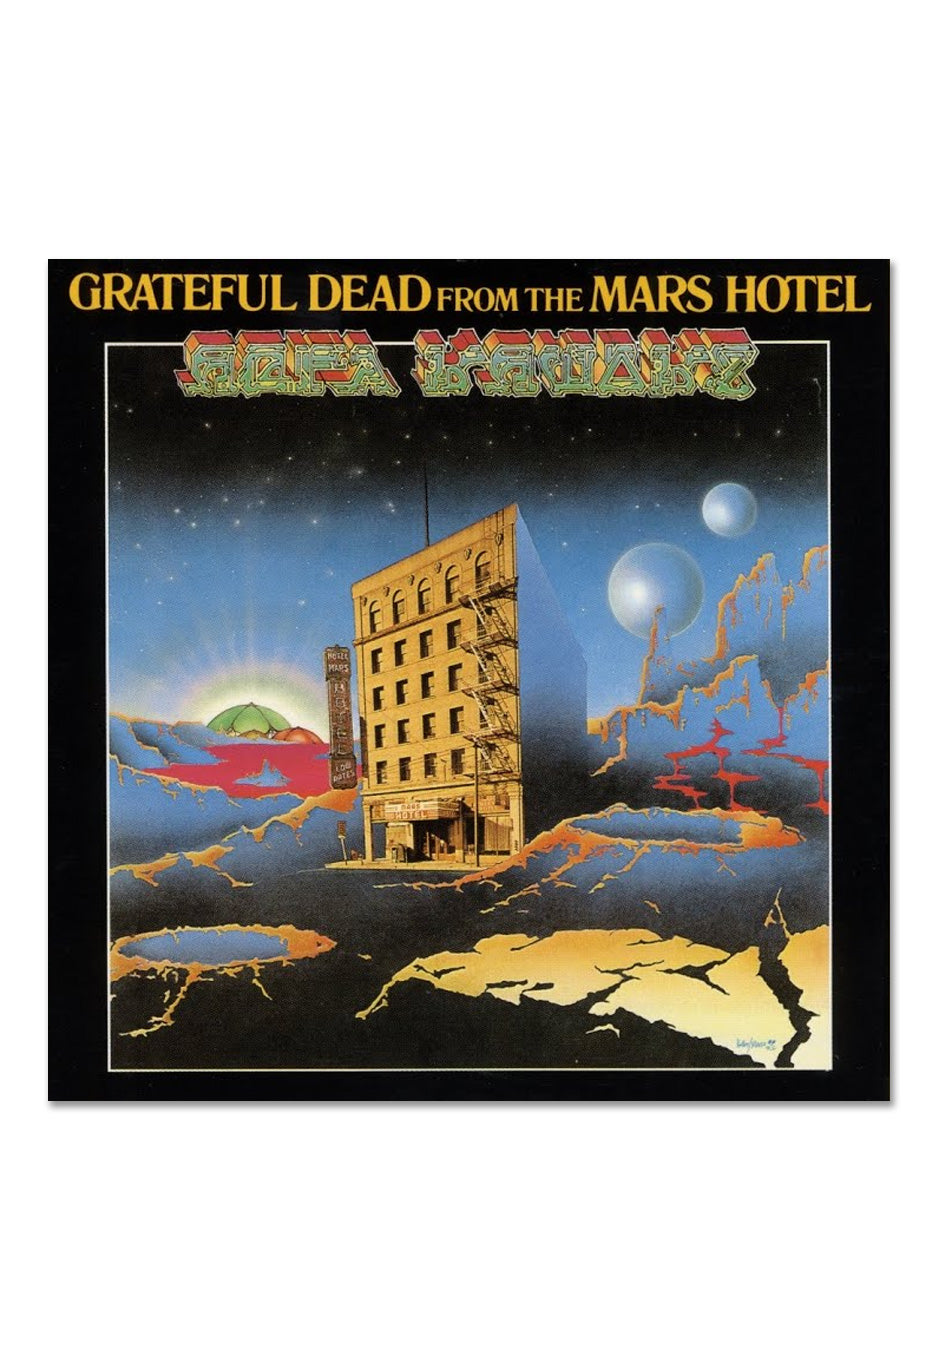 Grateful Dead - From The Mars Hotel (50th Anniversary Edition) Ltd. Neon Pink - Colored Vinyl